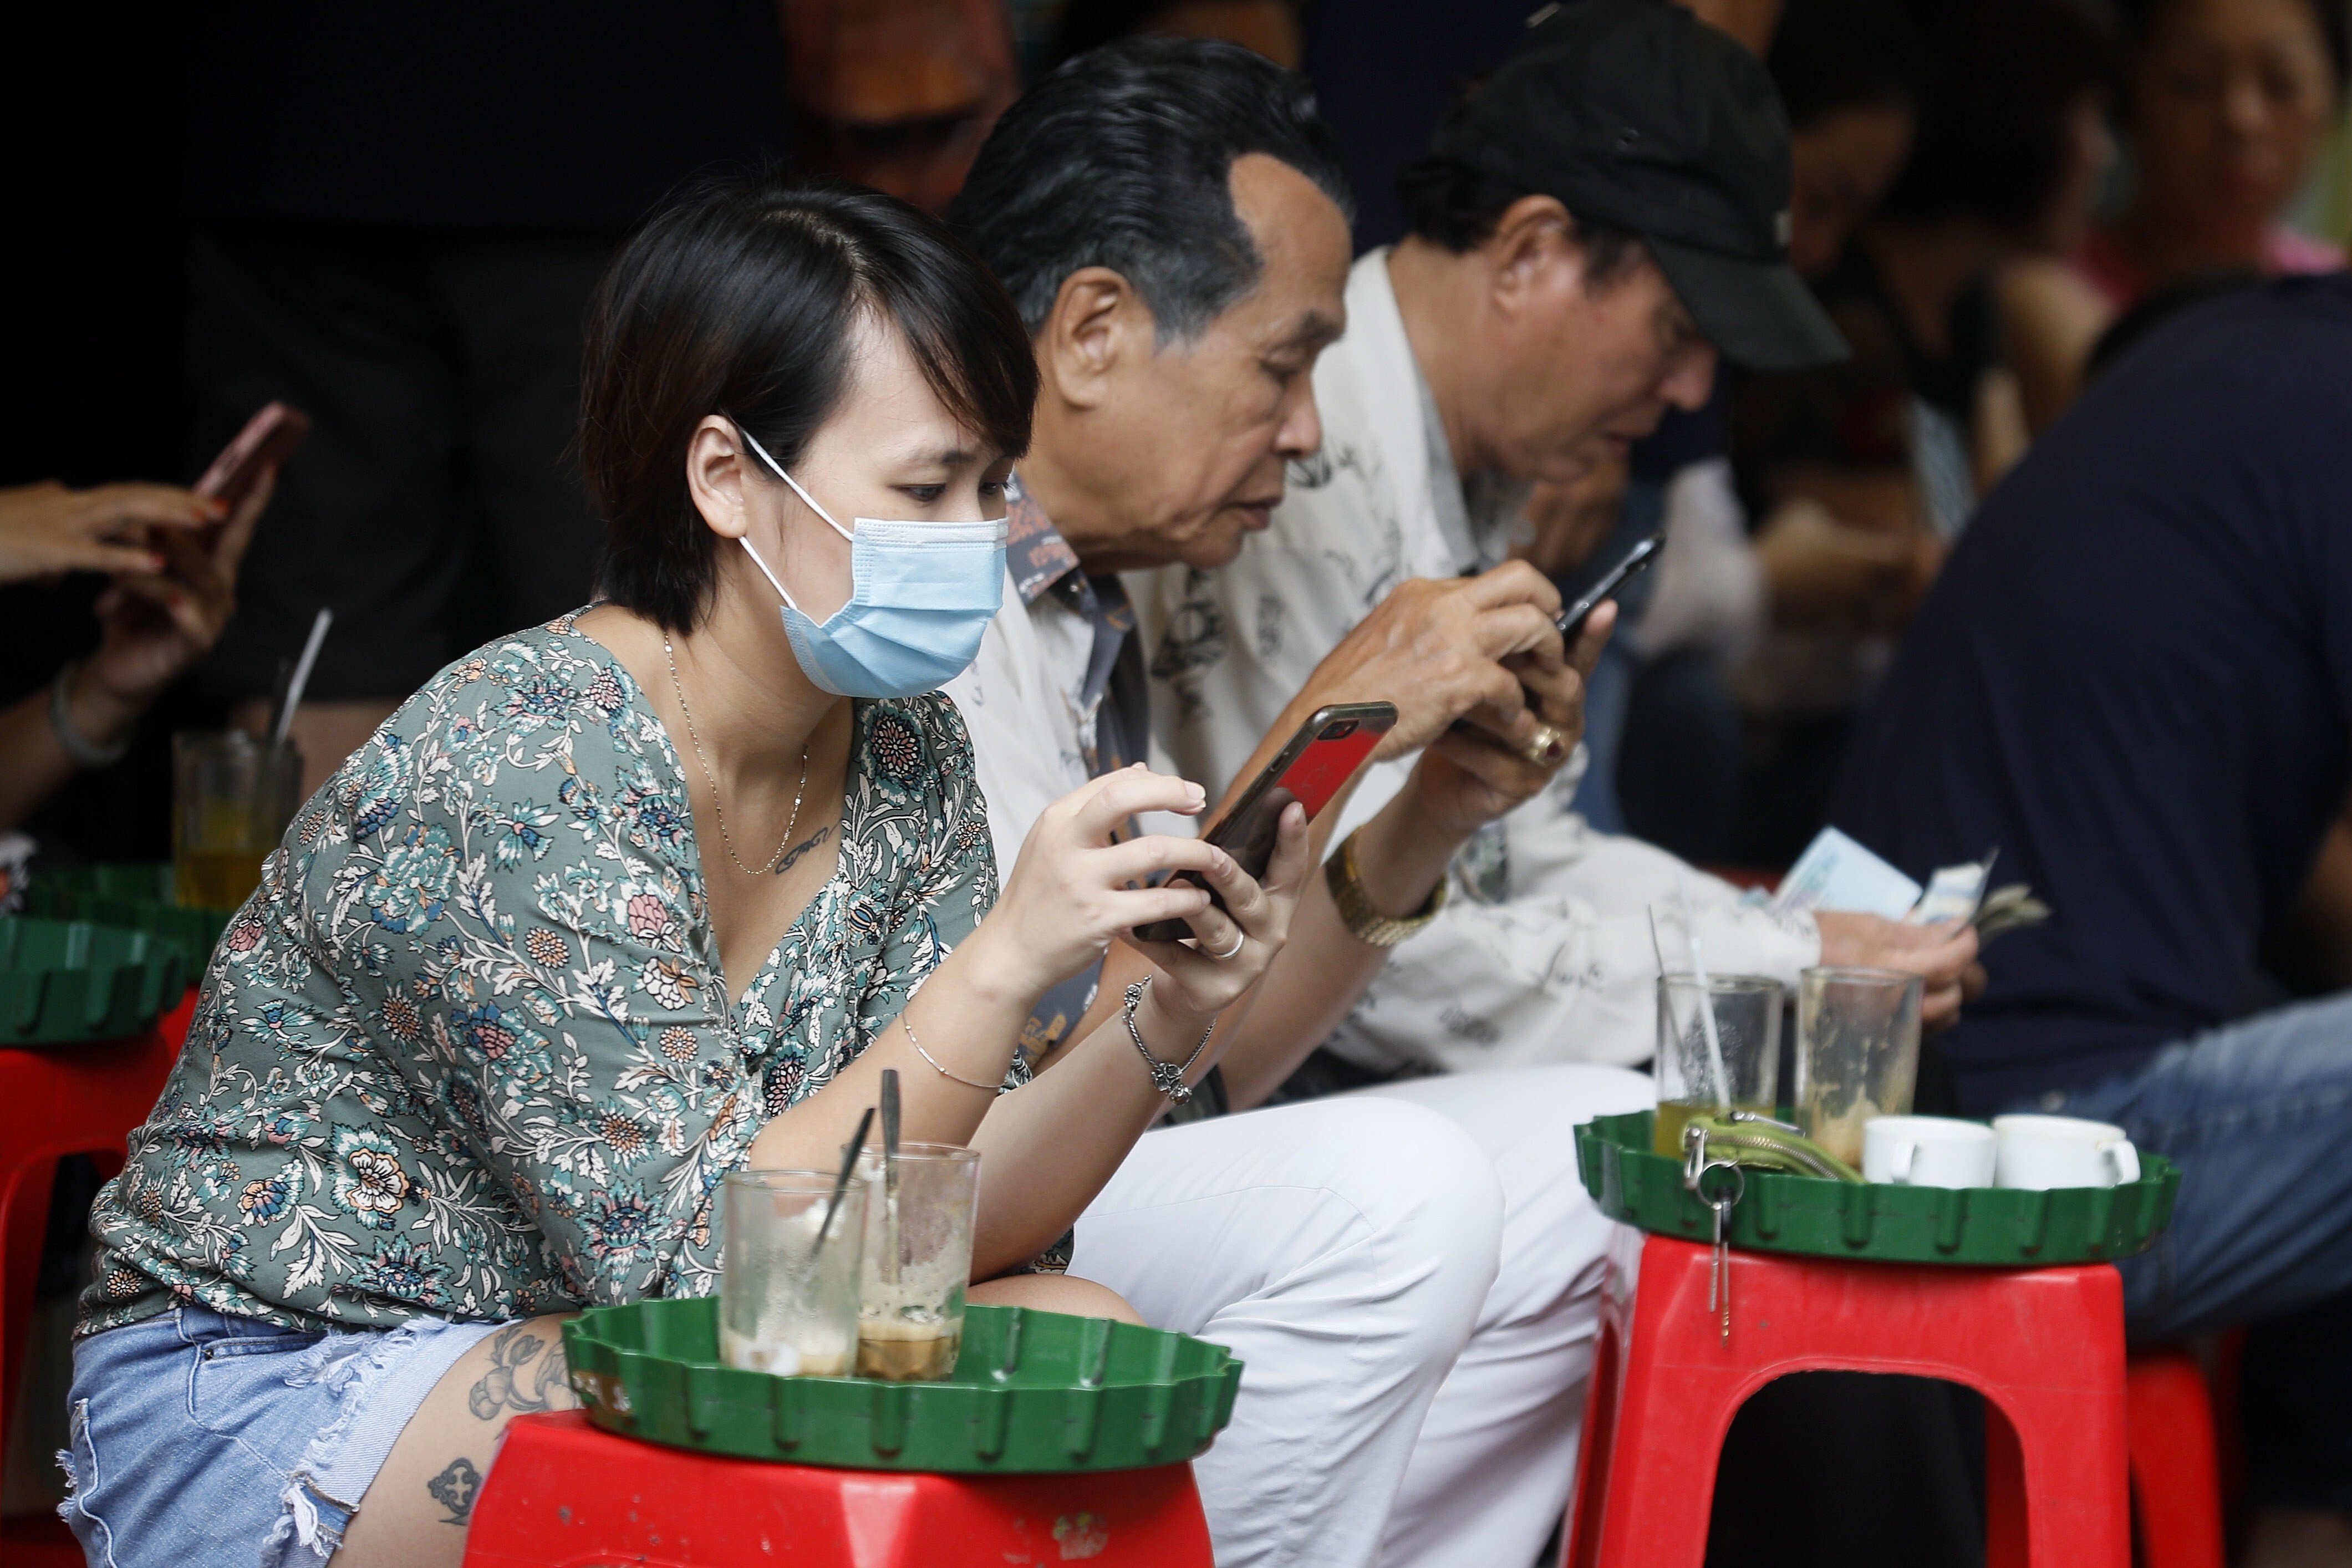 A woman checks her mobile phone at a street cafe in Hanoi. Photo: EPA-EFE